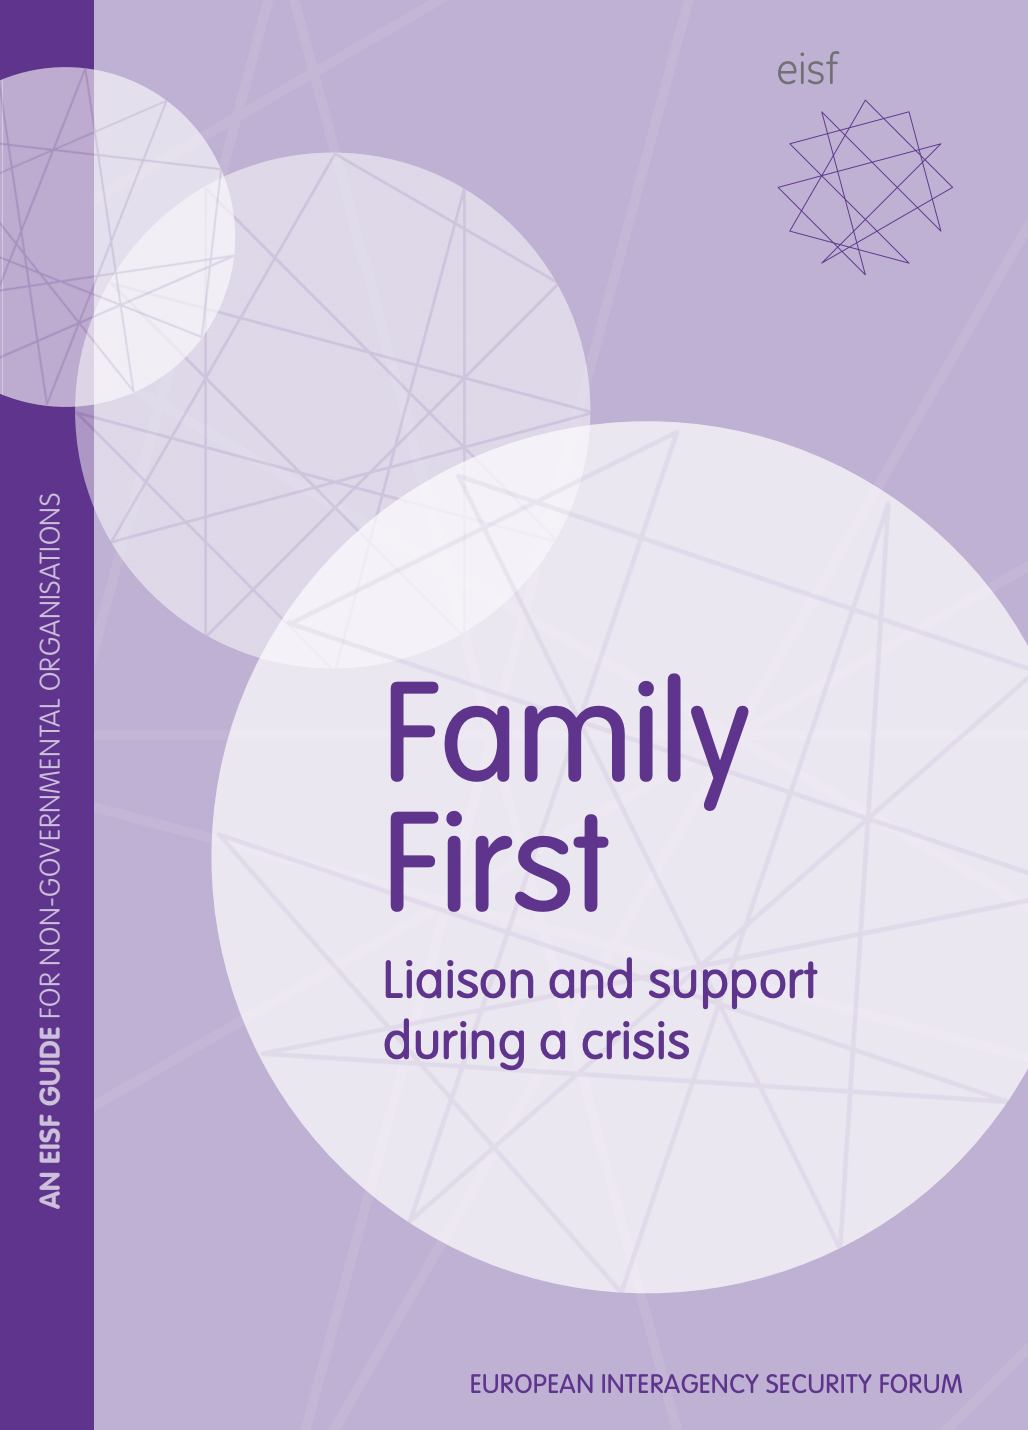 Family First: Liaison and support during a crisis